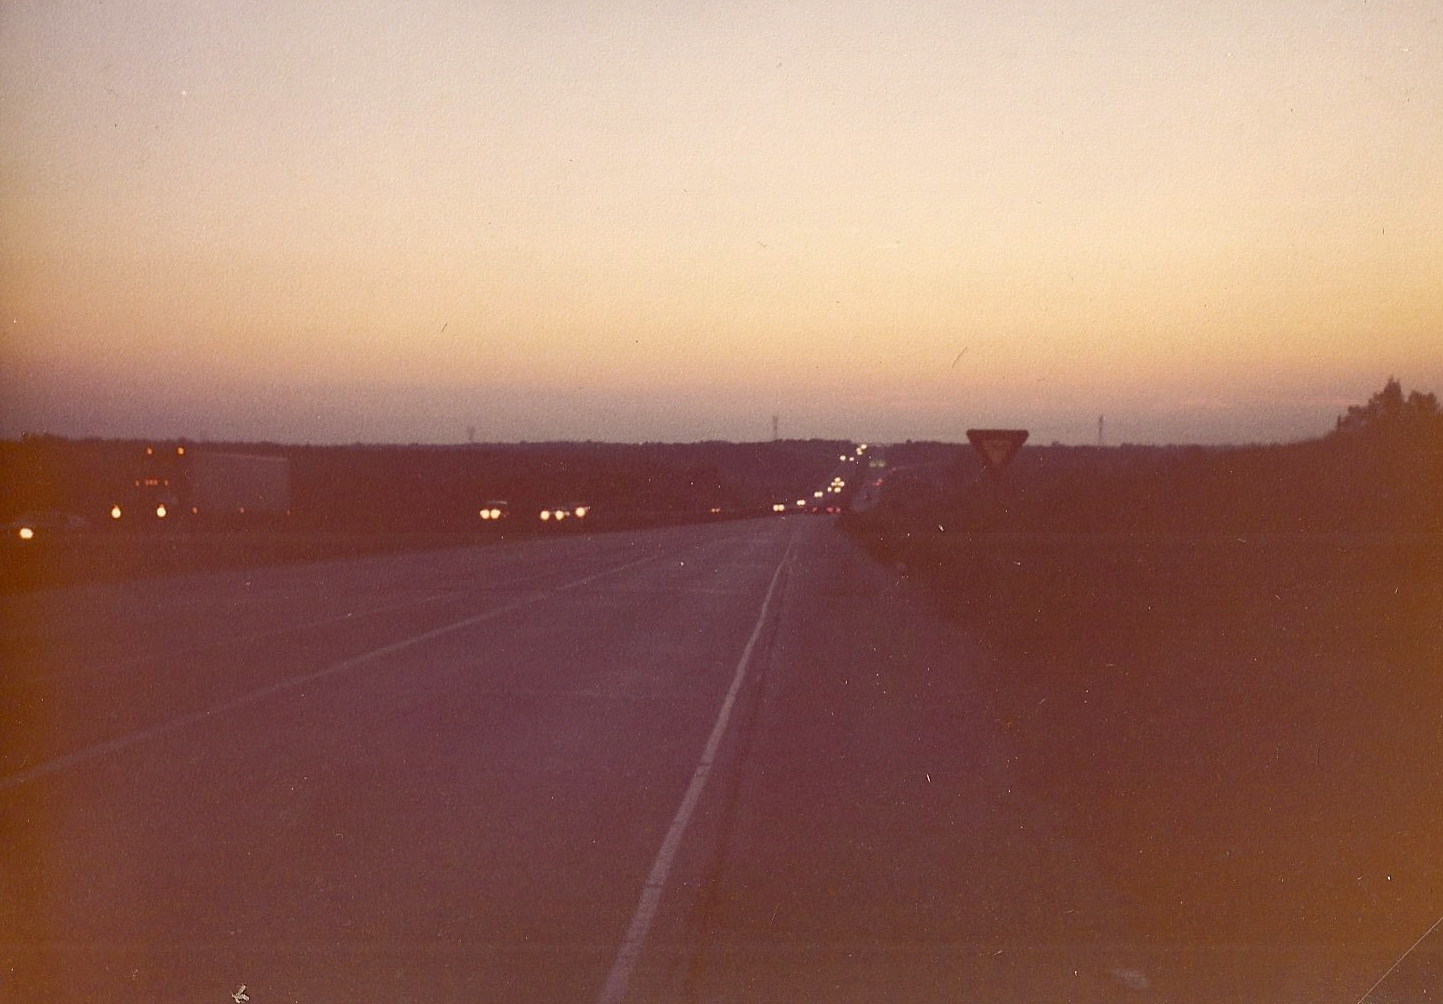 What are Americans like: Interstate 40, 1979